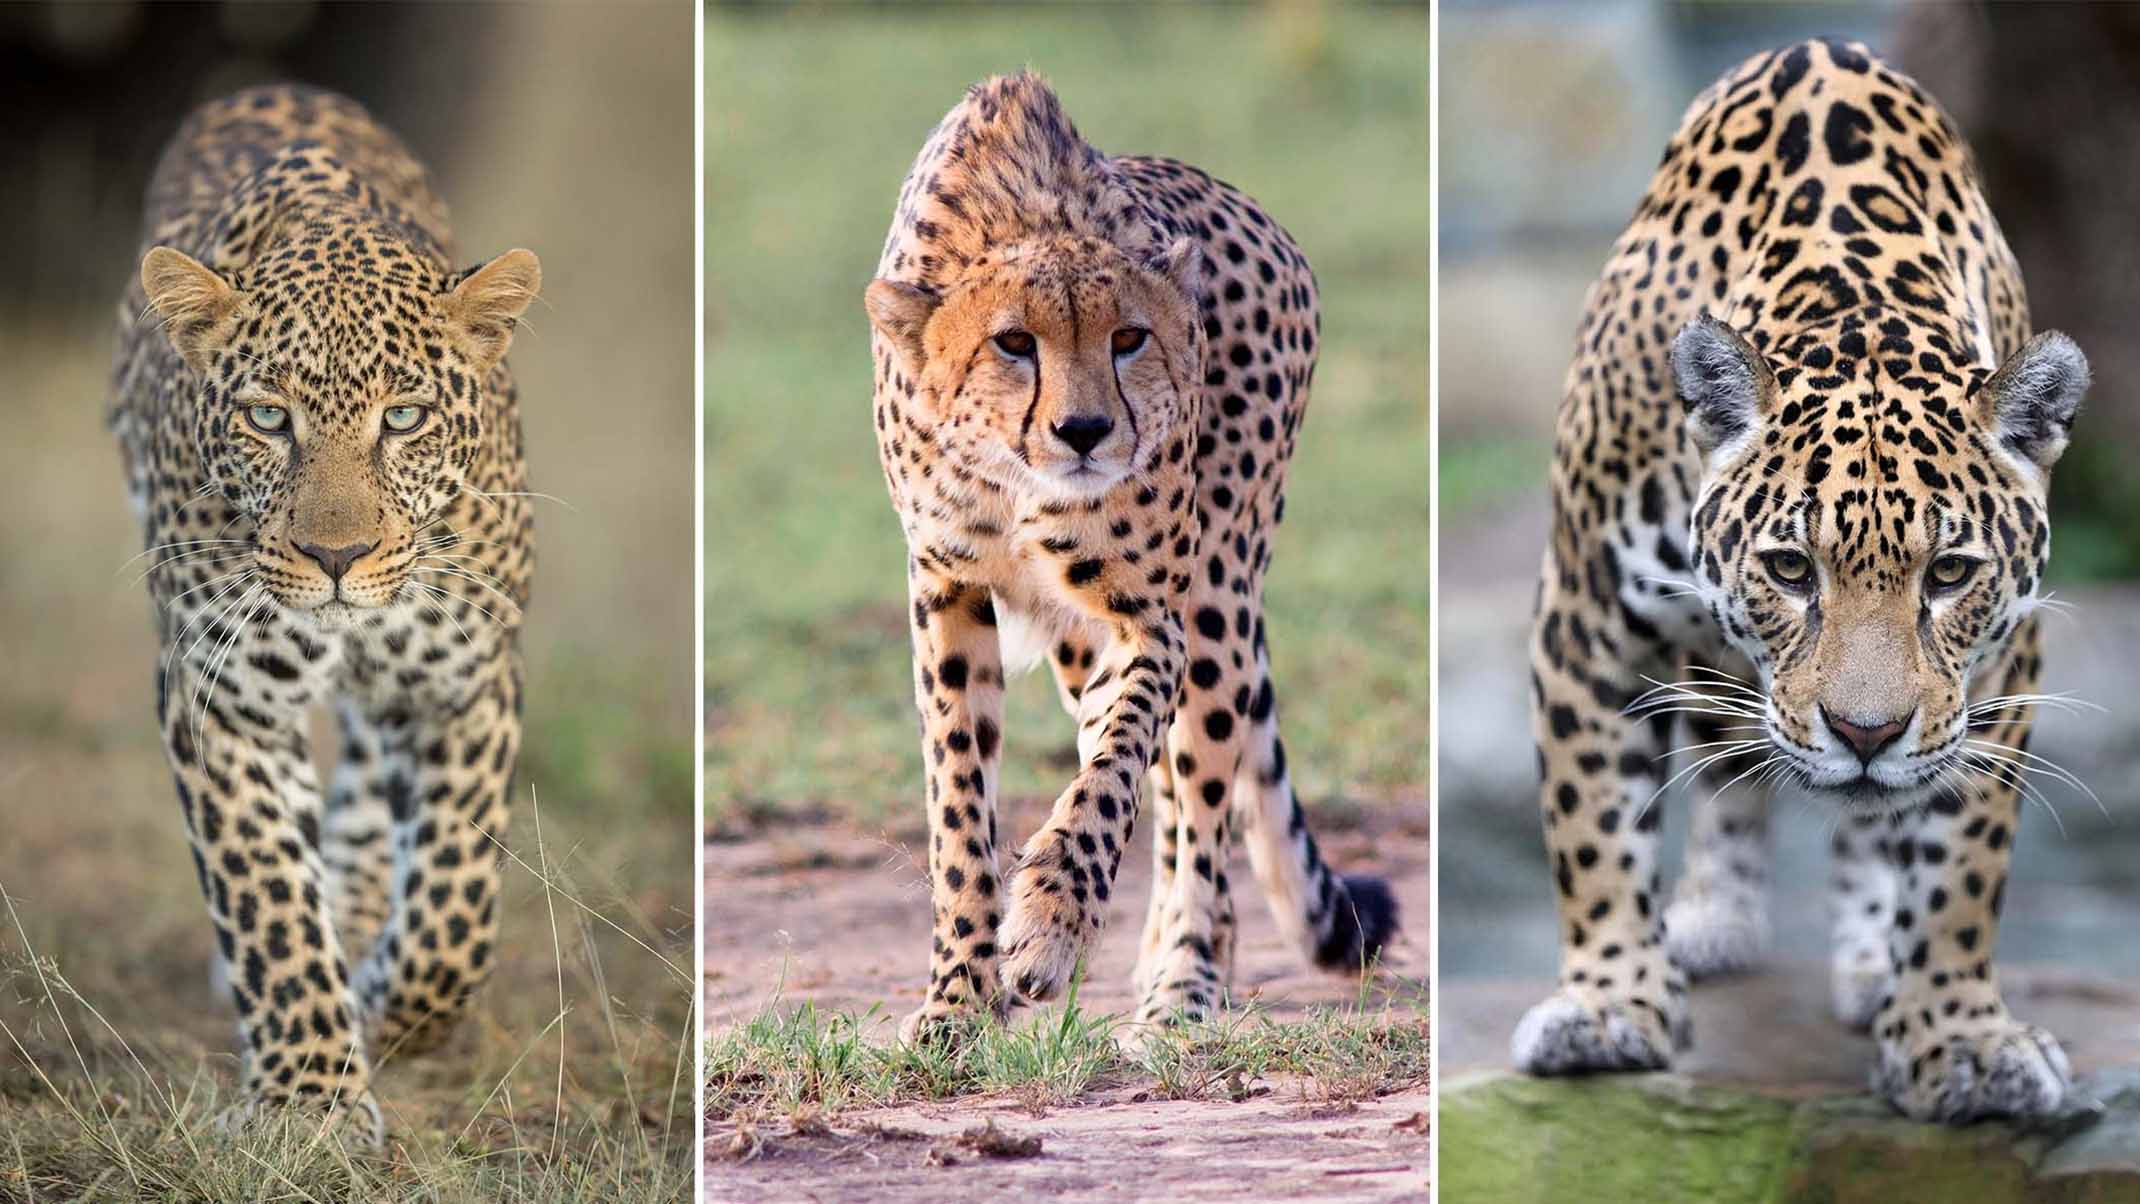 If a jaguar, a cheetah, and a leopard would race each other, who